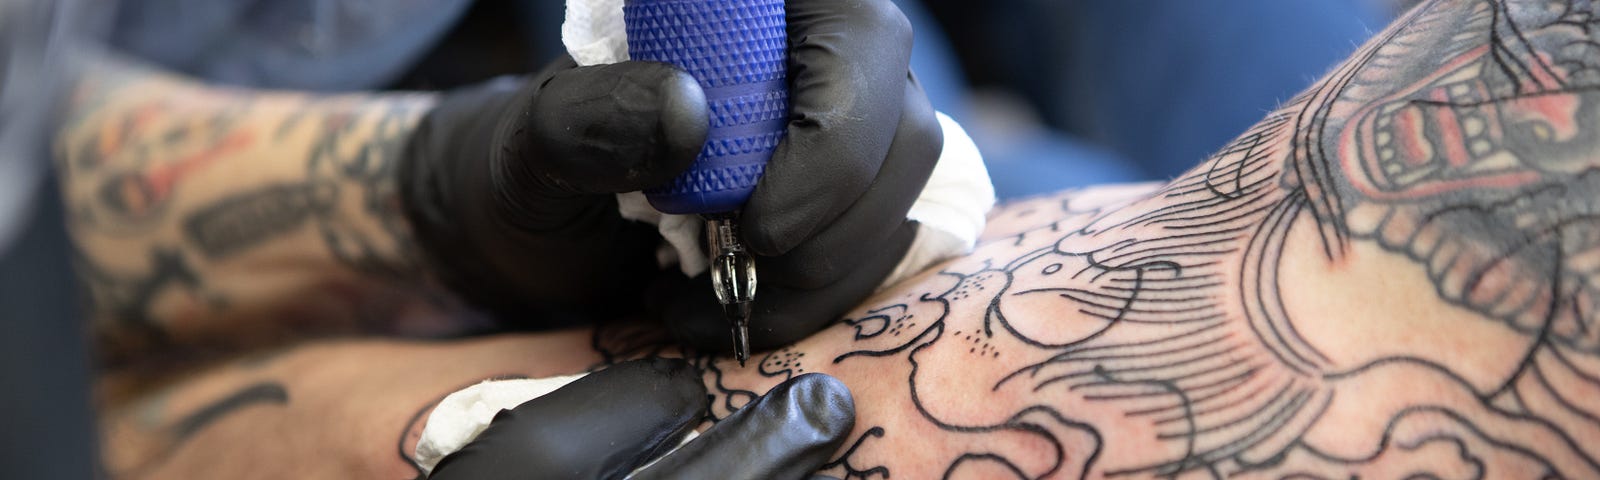 A close up shot of someone having a tattoo on their arm